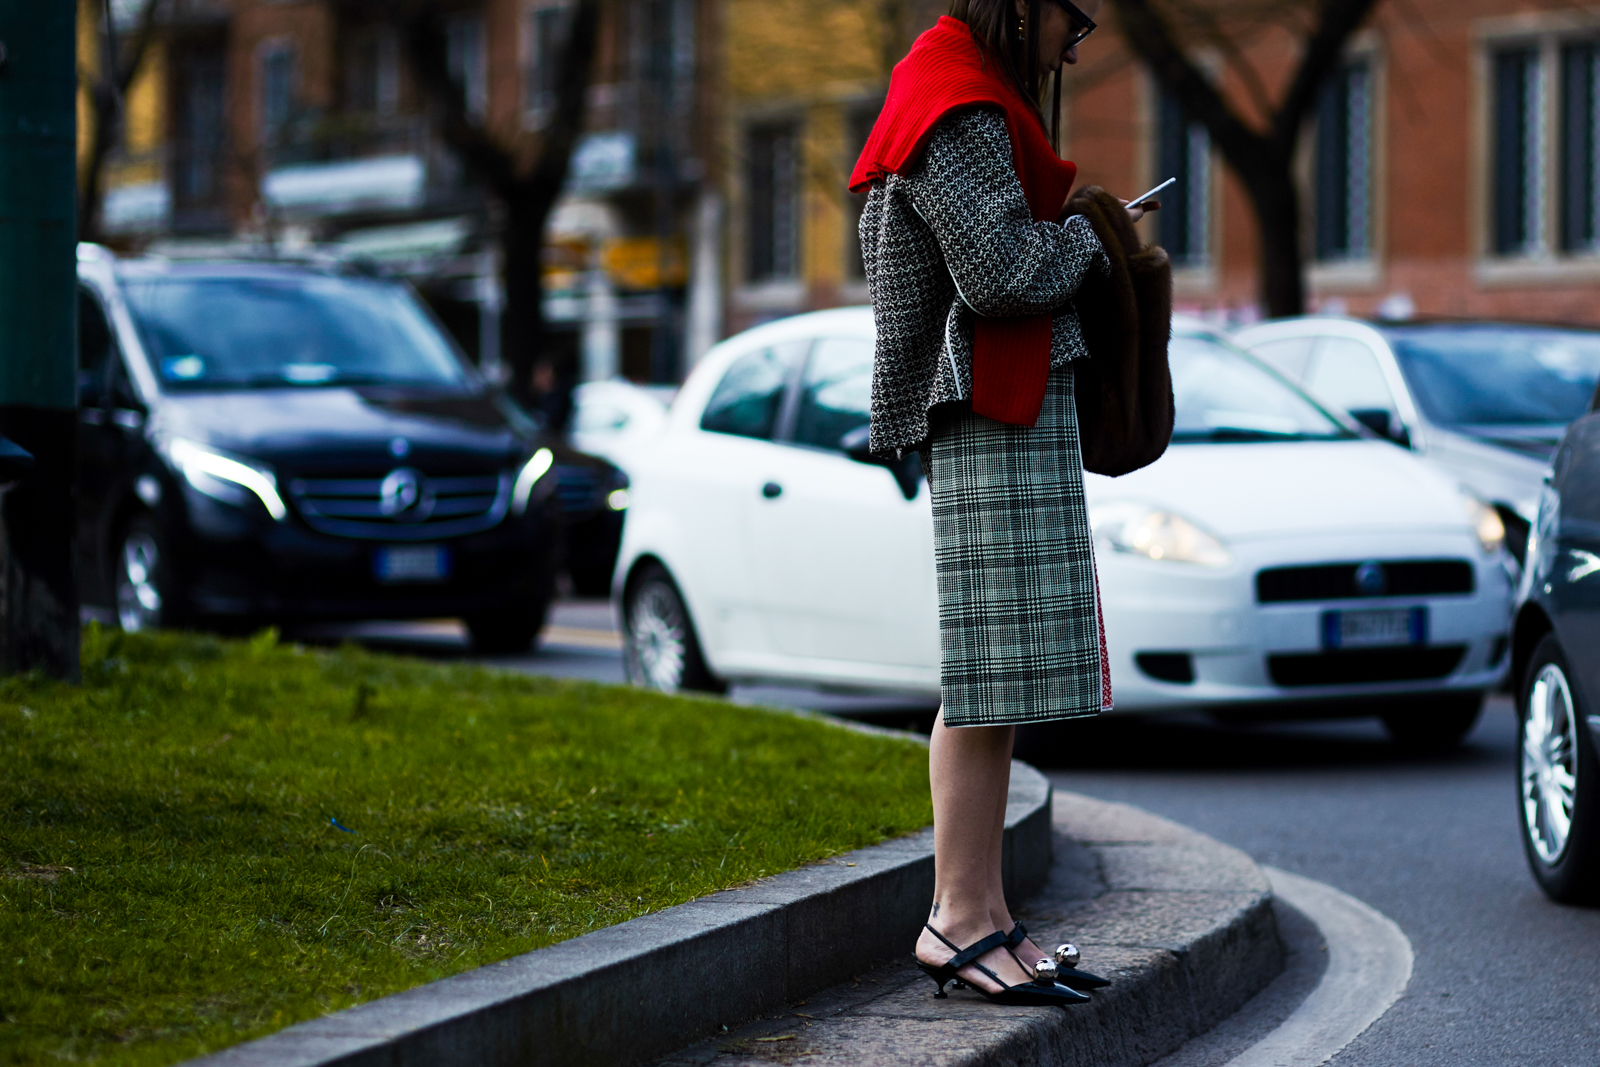 MFW Street Style: Russian stylist Natasha Goldenberg wearing a Prada outfit and a fur bag after a fashion show in Milan, Italy